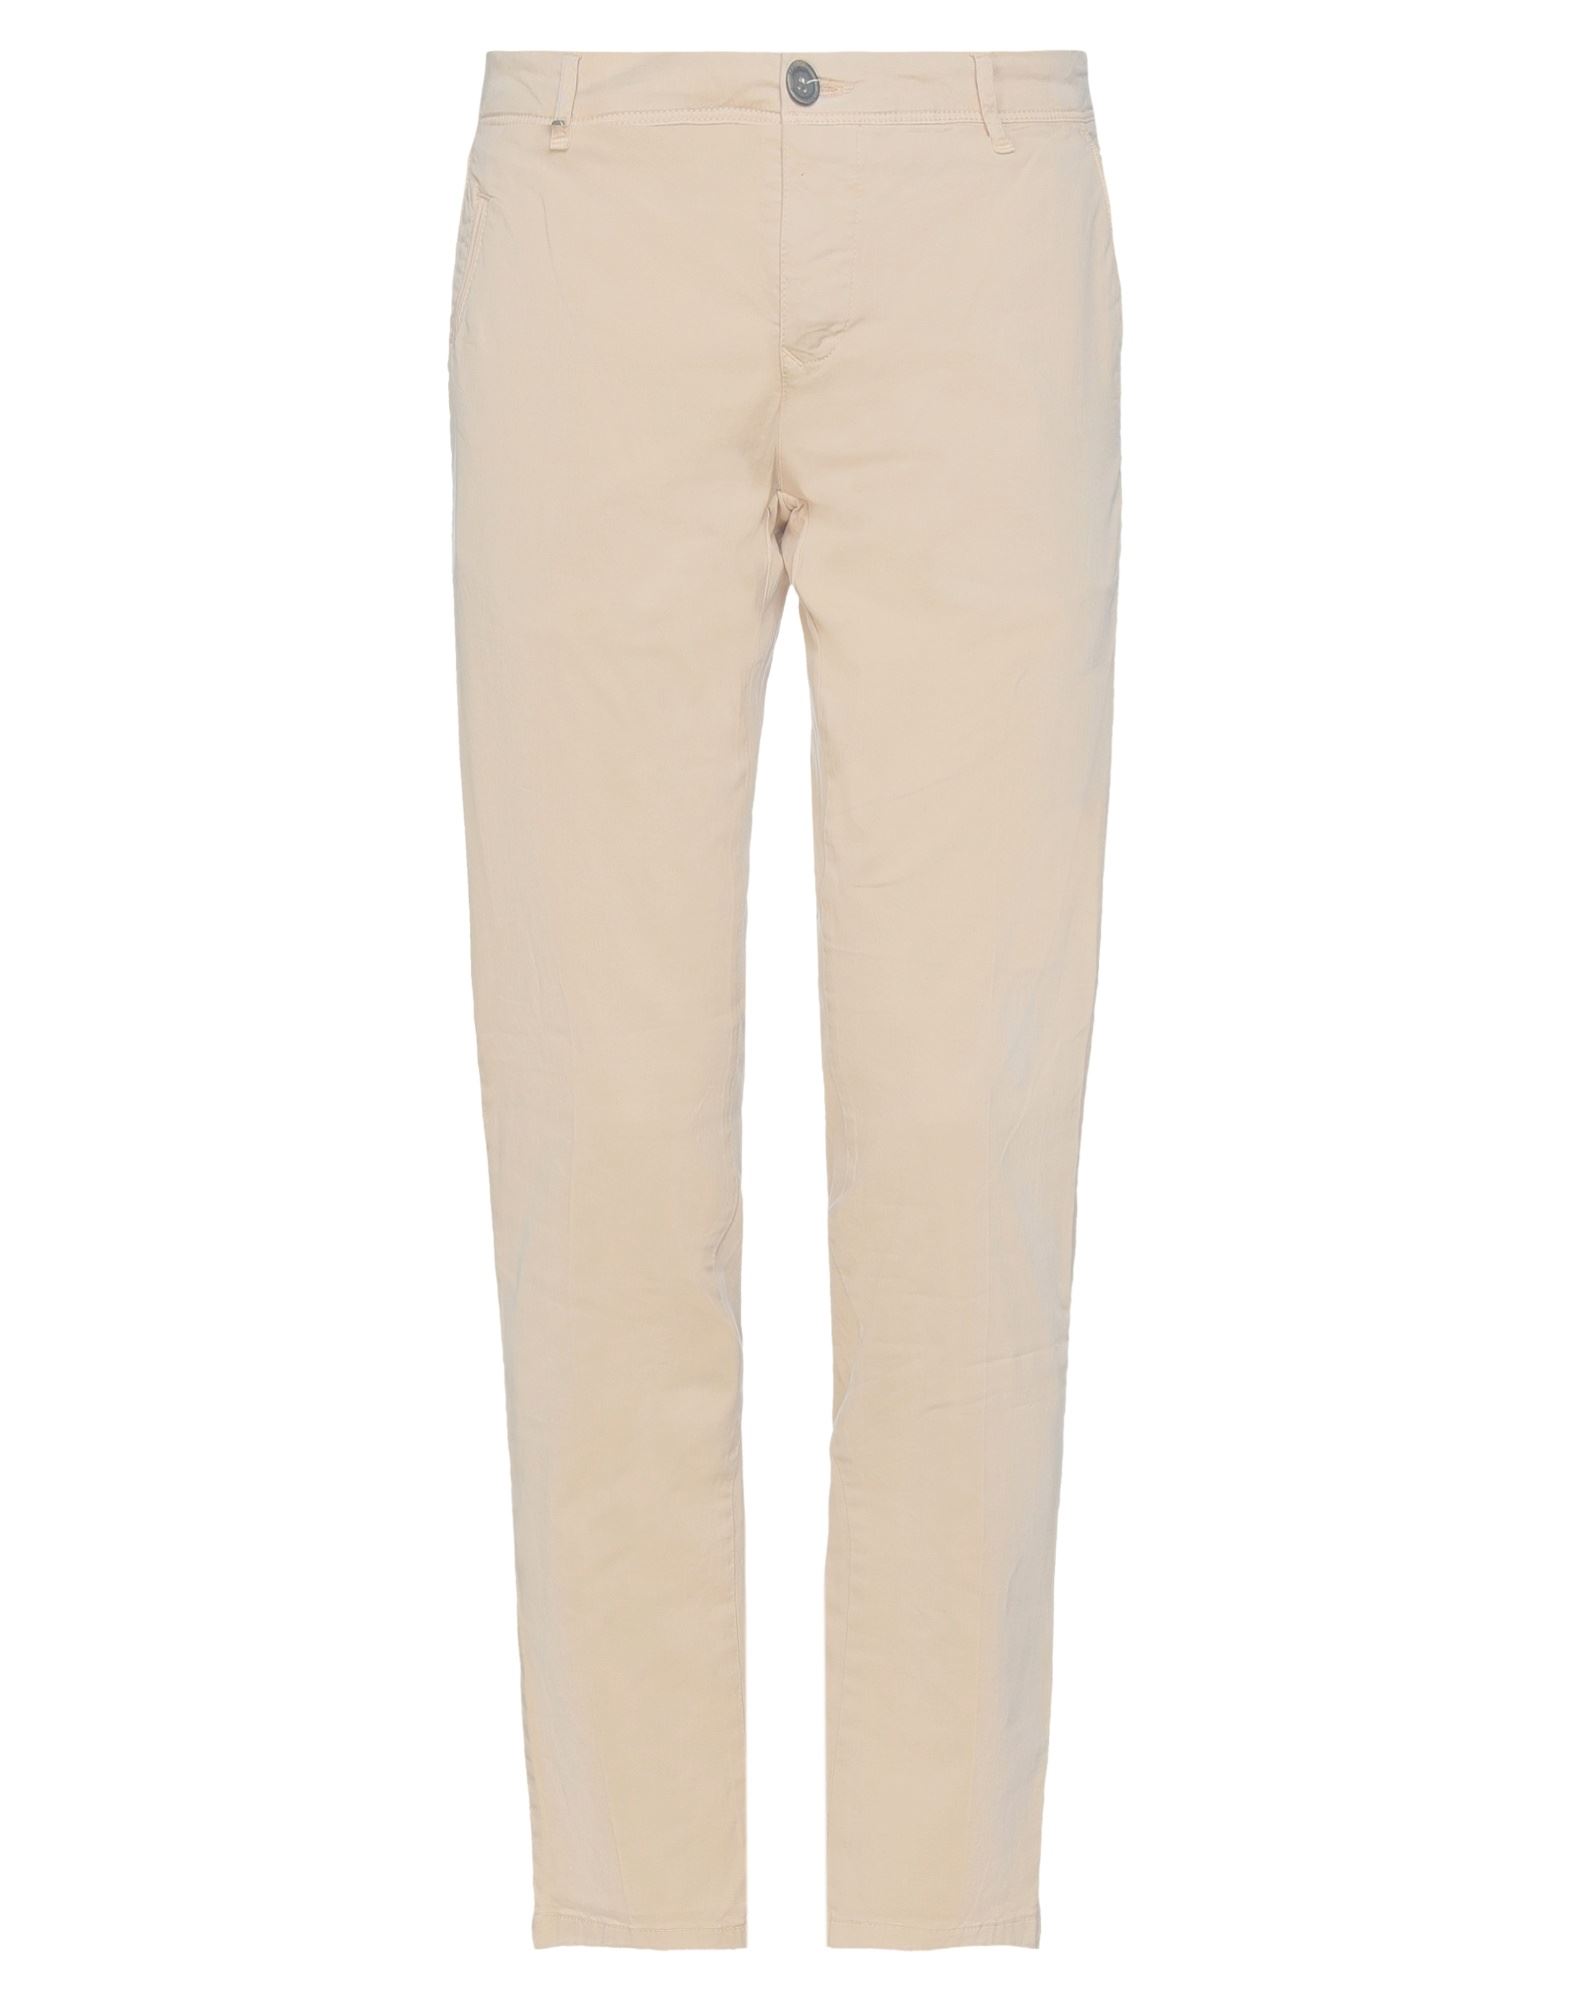 BEVERLY HILLS POLO CLUB Pants